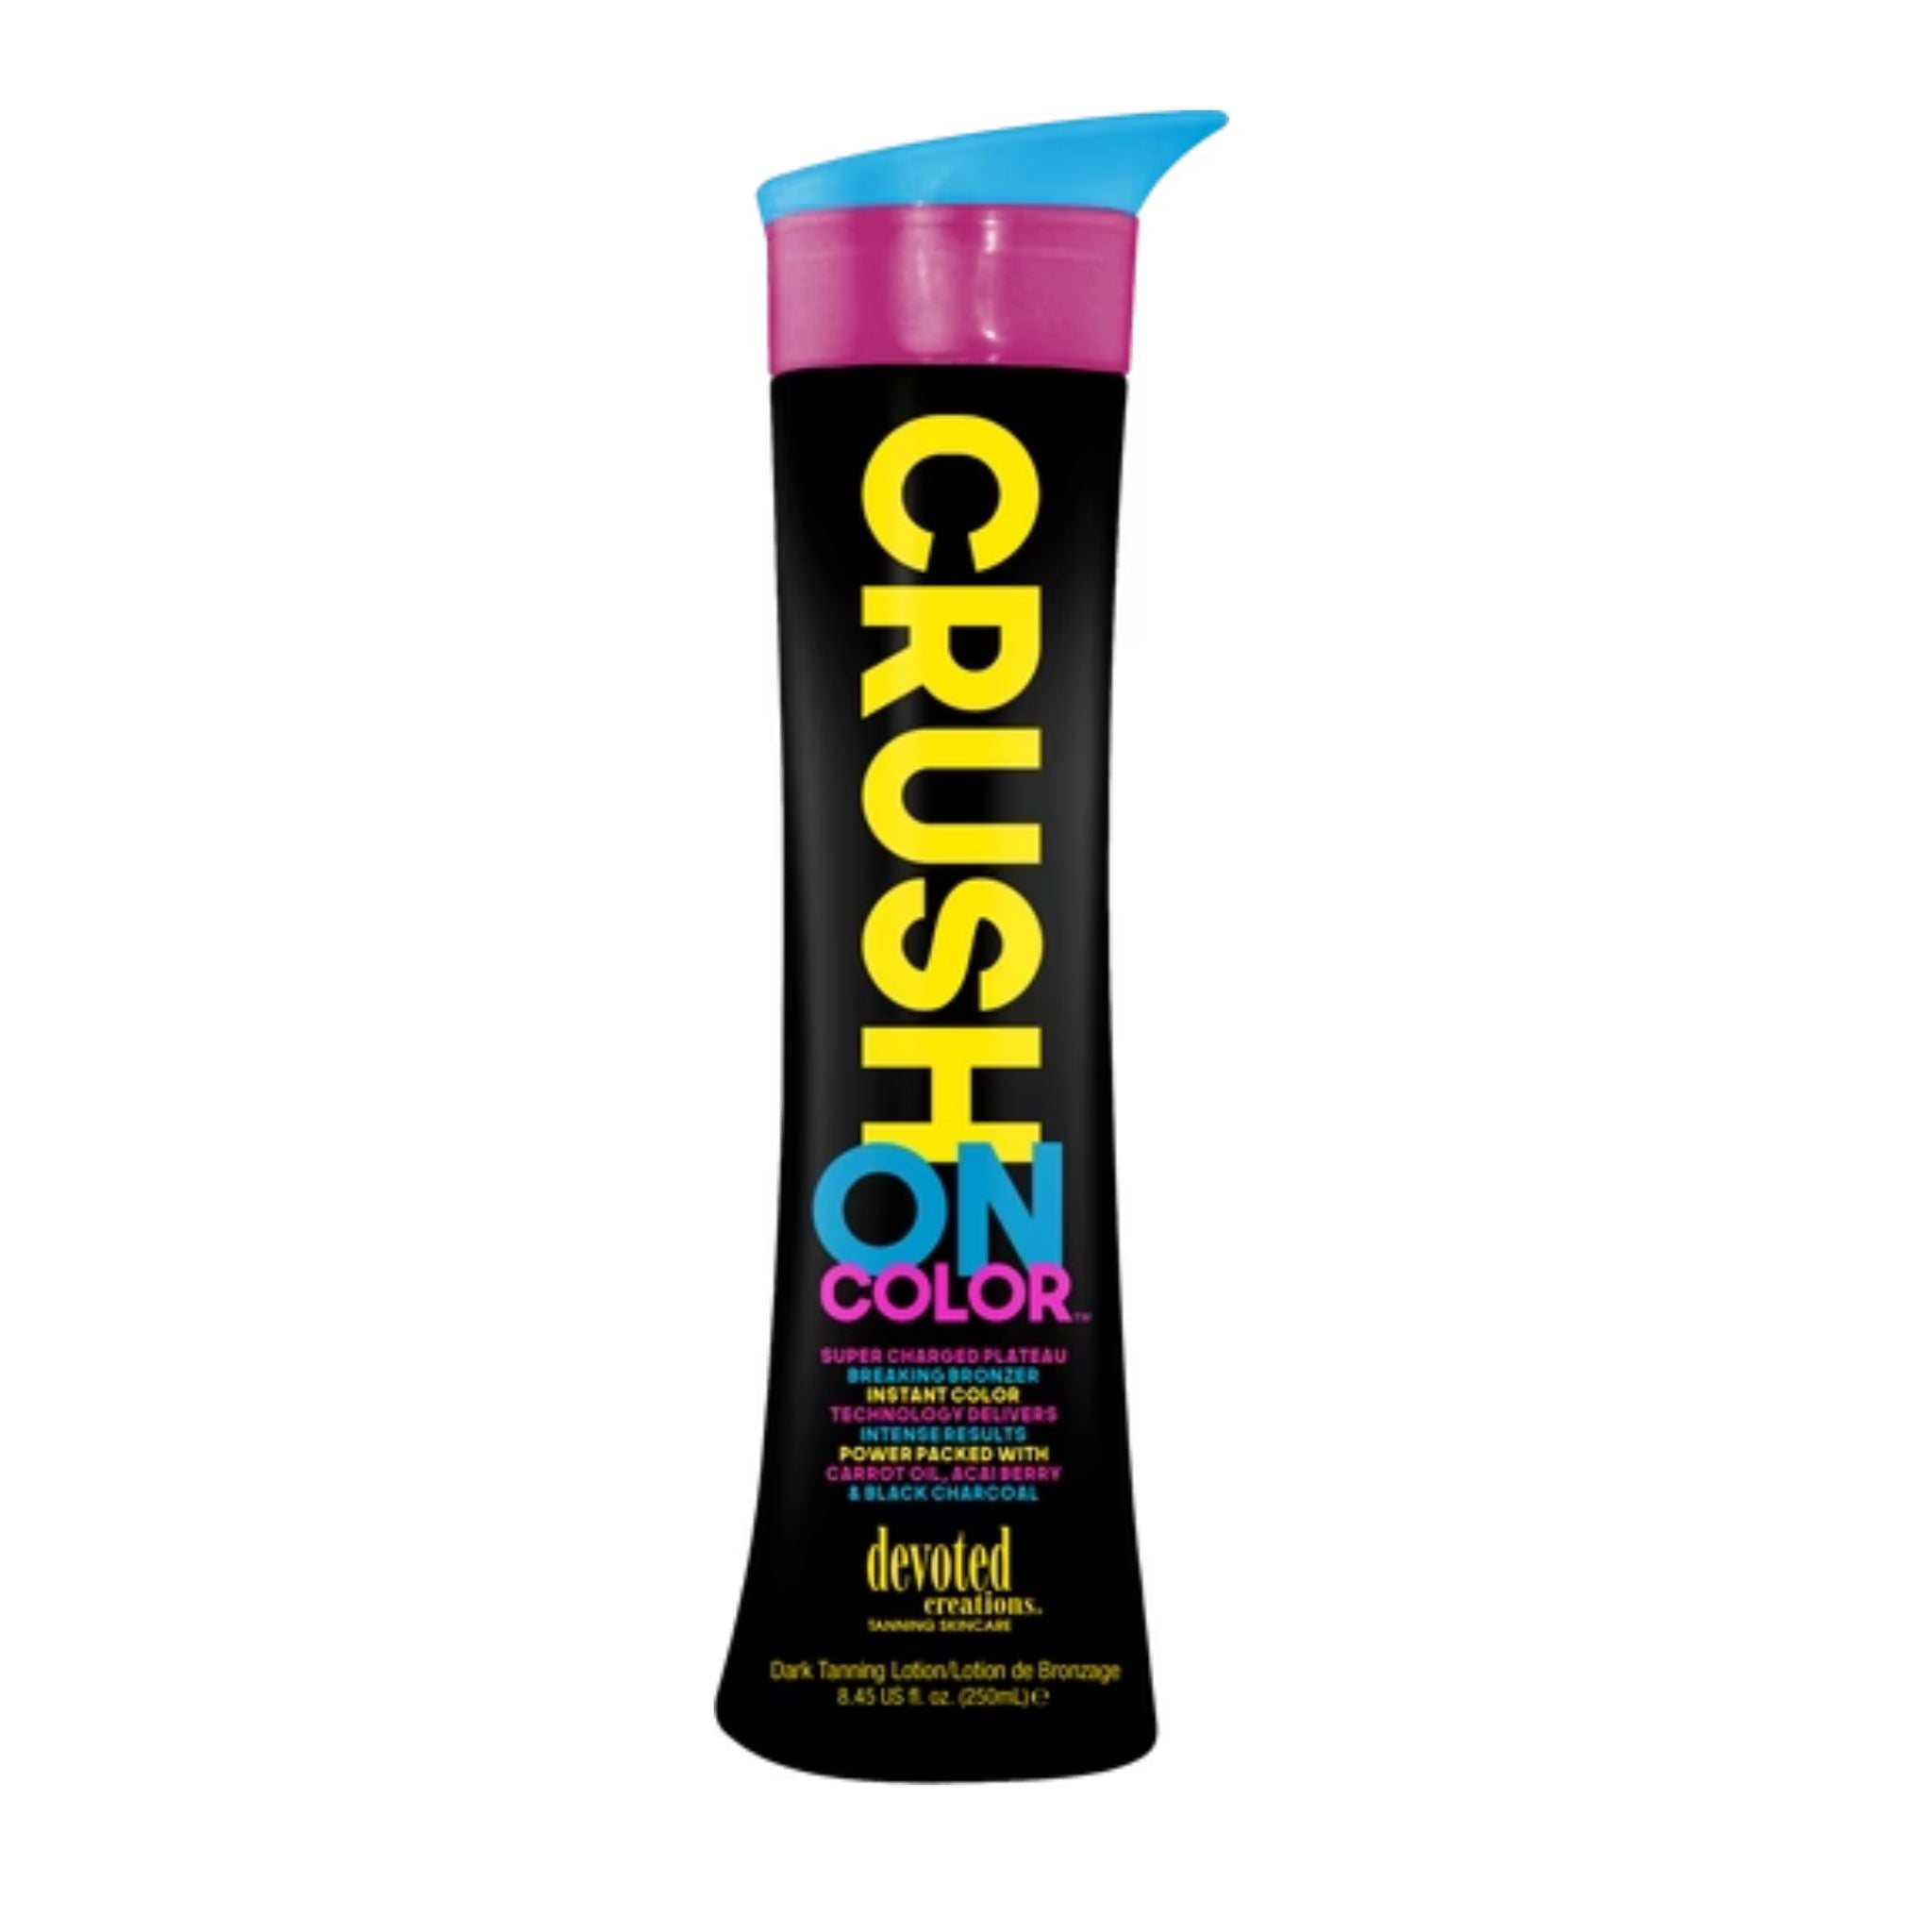 Devoted Creations Crush on Color Tanning Lotion Tanning Lotion